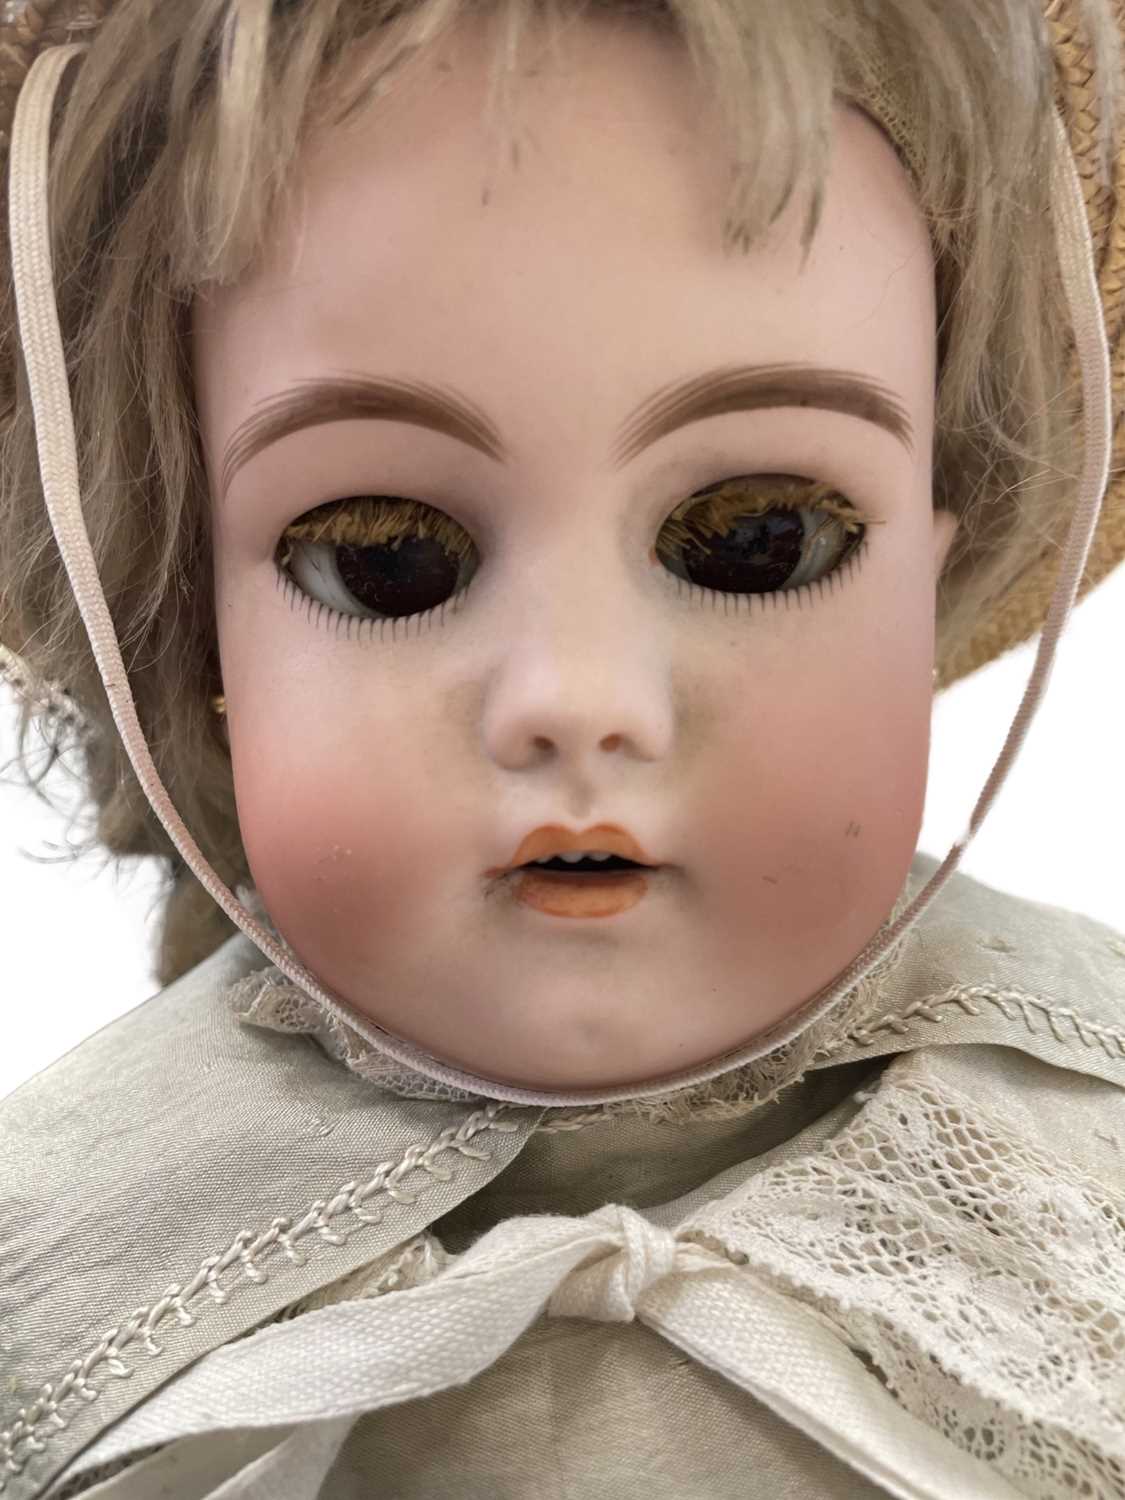 A Simon and Halbig bisque head doll, with blue eyes and teeth showing. Pierced ears with later - Bild 5 aus 6